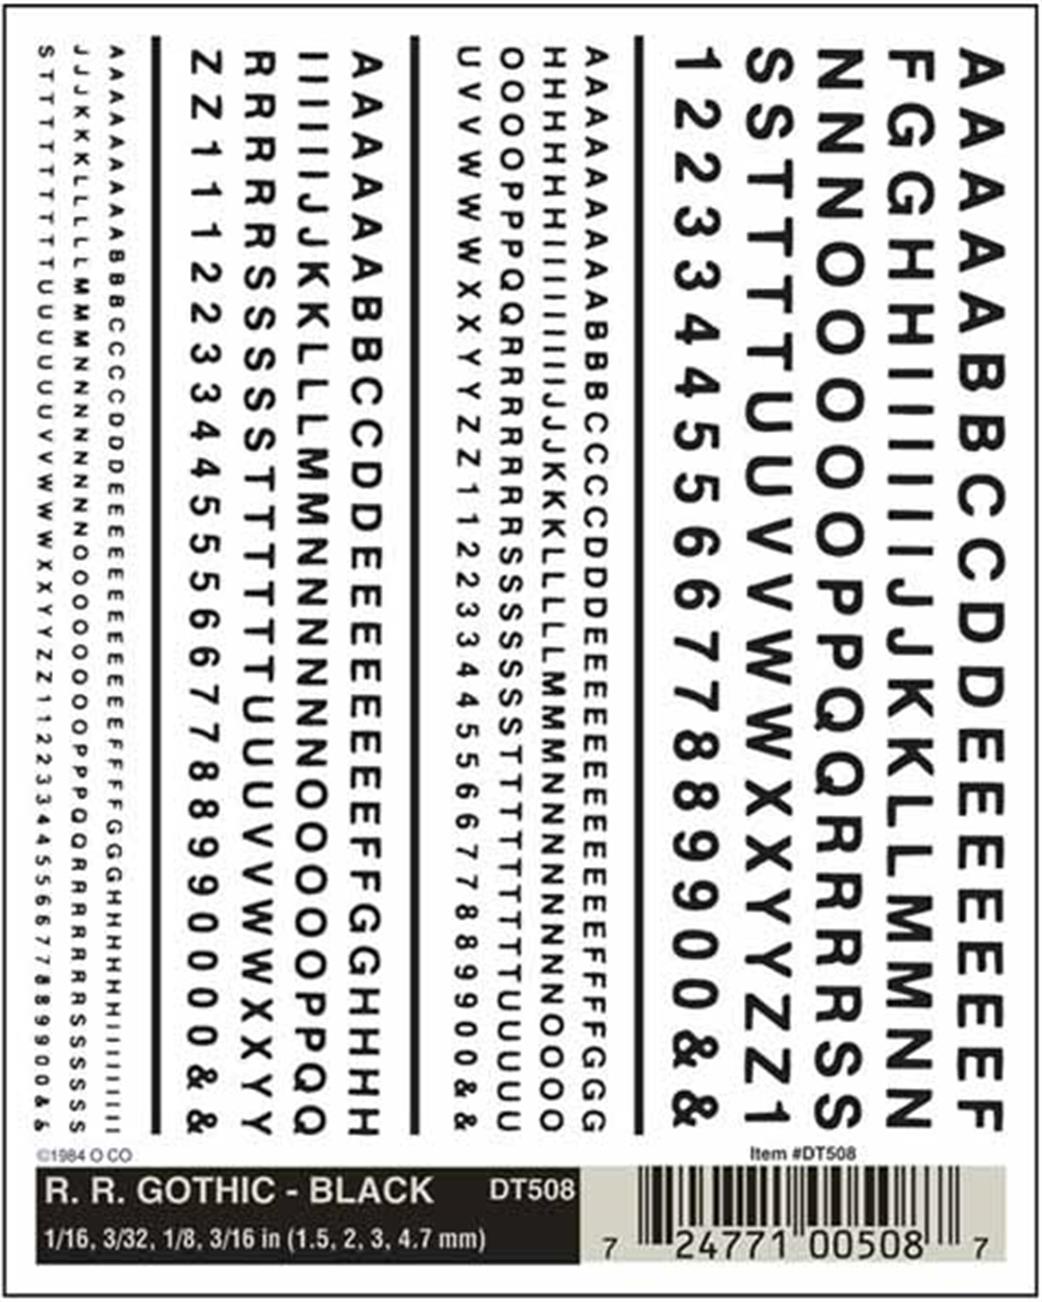 Woodland Scenics DT508 Dry Transfer Decals Railroad Gothic Lettering Black